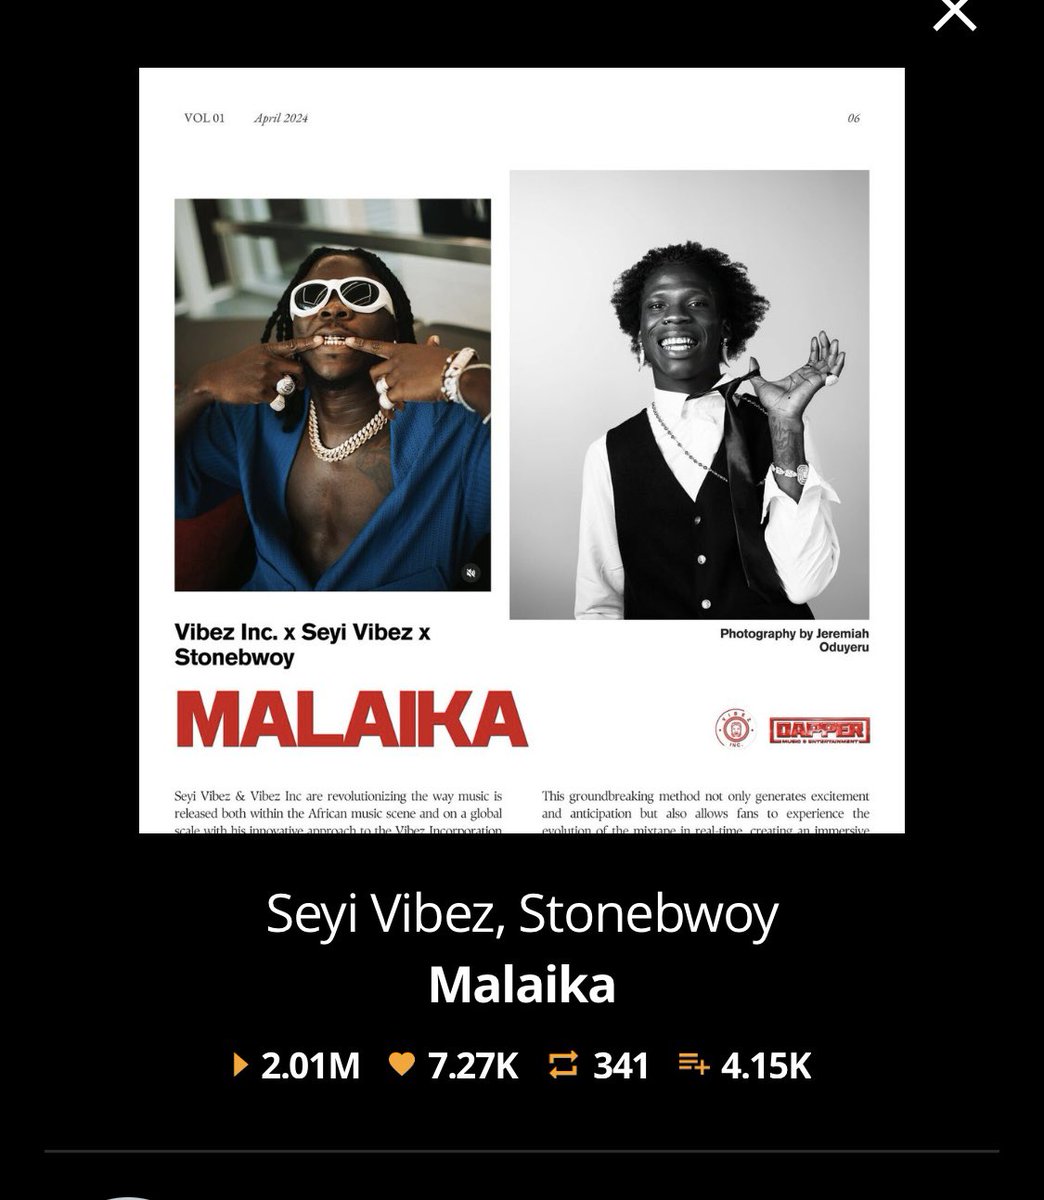 Seyi Vibez and Stonebwoy's single 'Malaika' on the Vibez Inc. mixtape has been listened to by 2 million people on Audiomack in a matter of days.